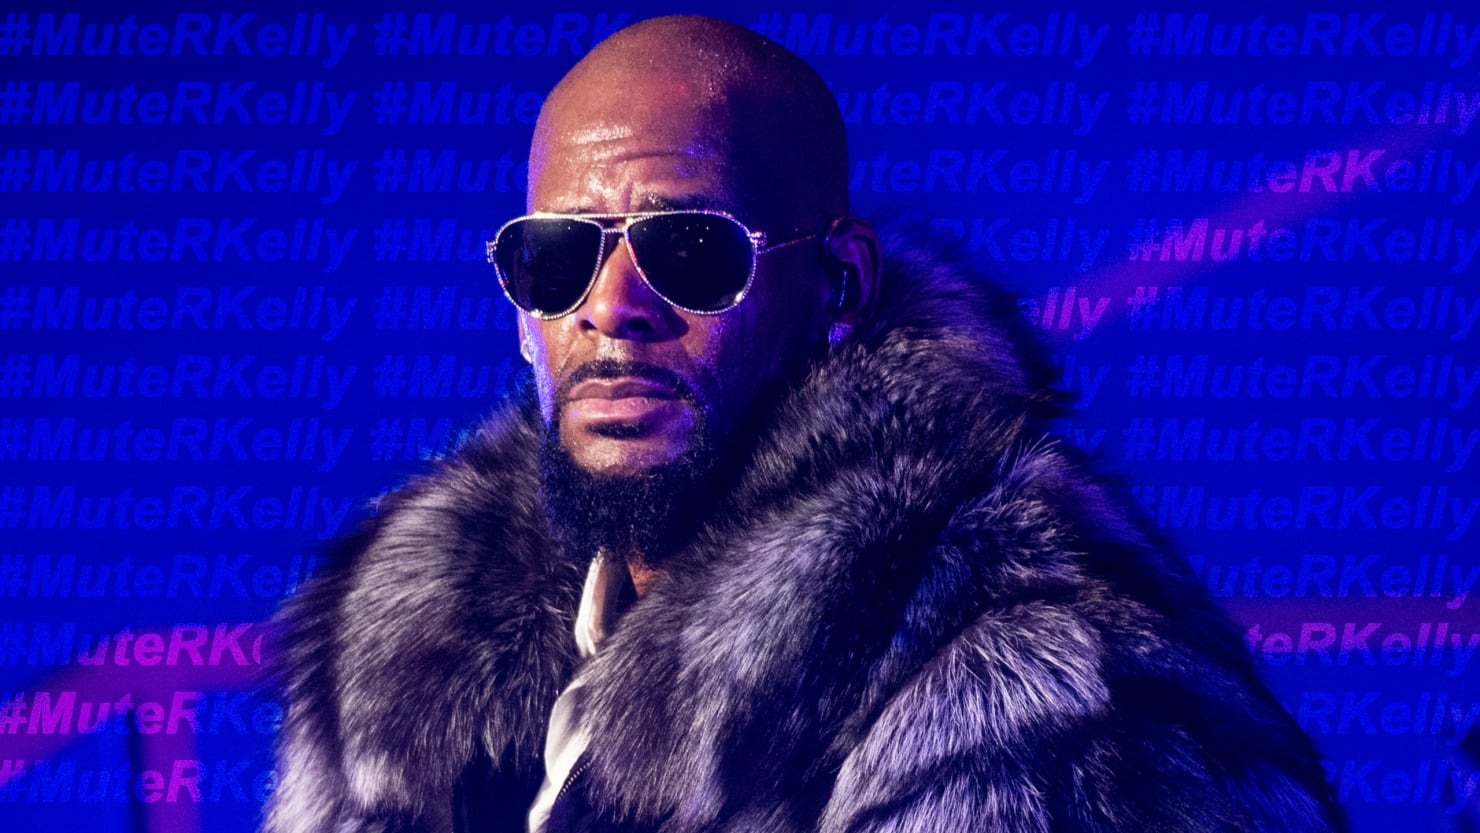 R. Kelly Faces a #MeToo Reckoning as Time’s Up Backs a Protest